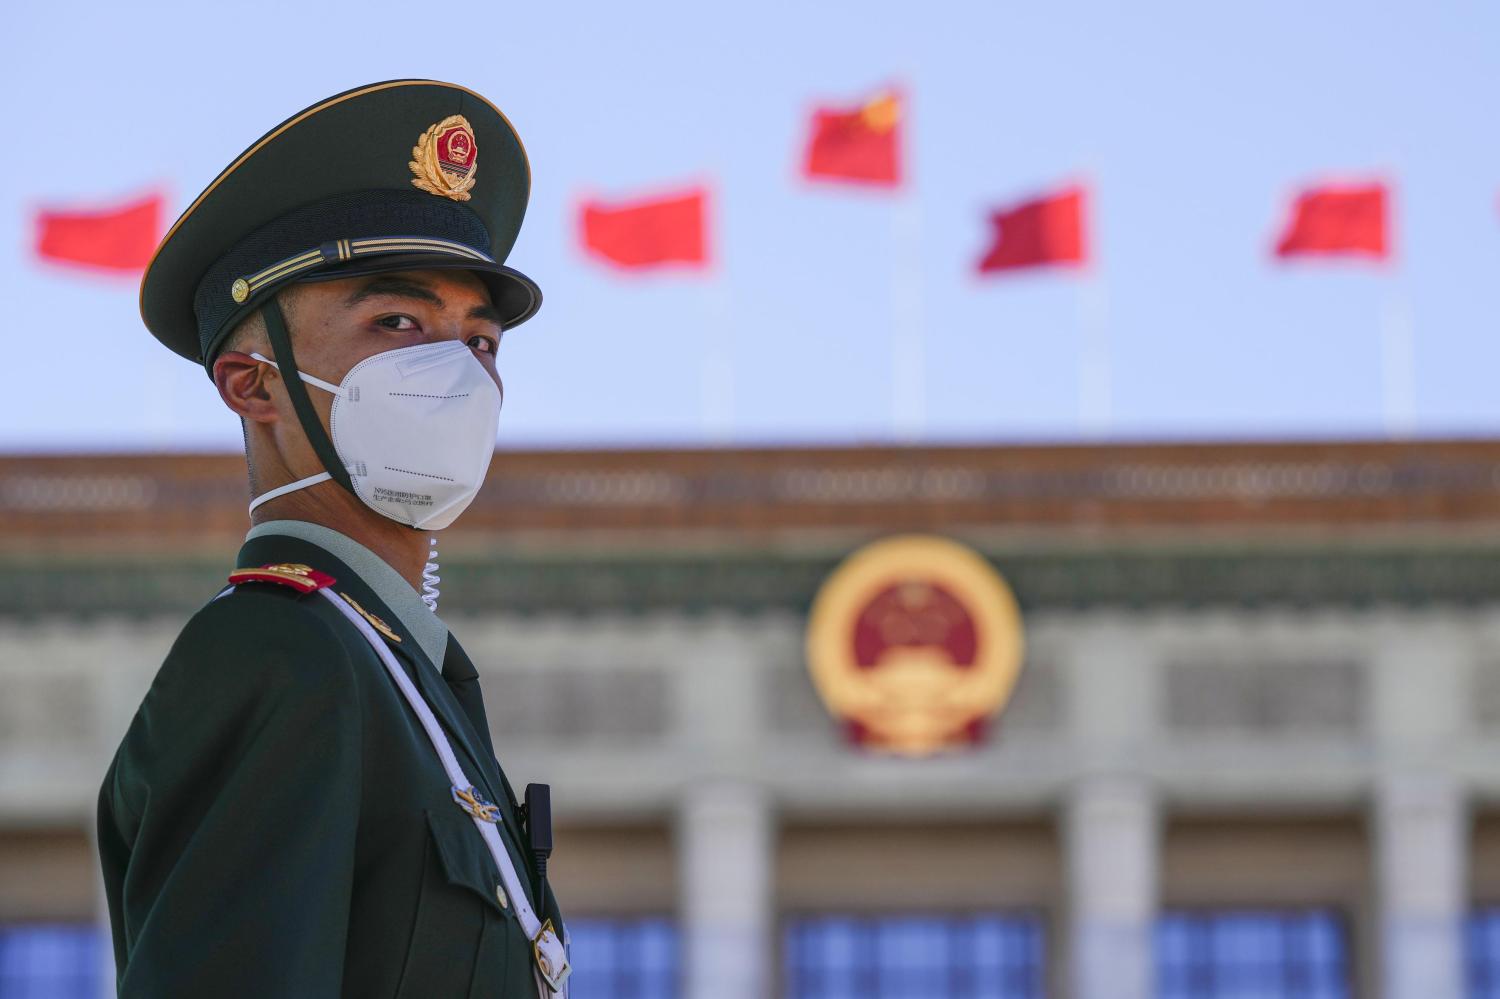 A security official wearing a face mask amid COVID-19 concerns stands guard on Oct. 22, 2022, near Beijing's Great Hall of the People (back), where the 20th National Congress of the Chinese Communist Party concluded the same day. (Kyodo)==KyodoNO USE JAPAN